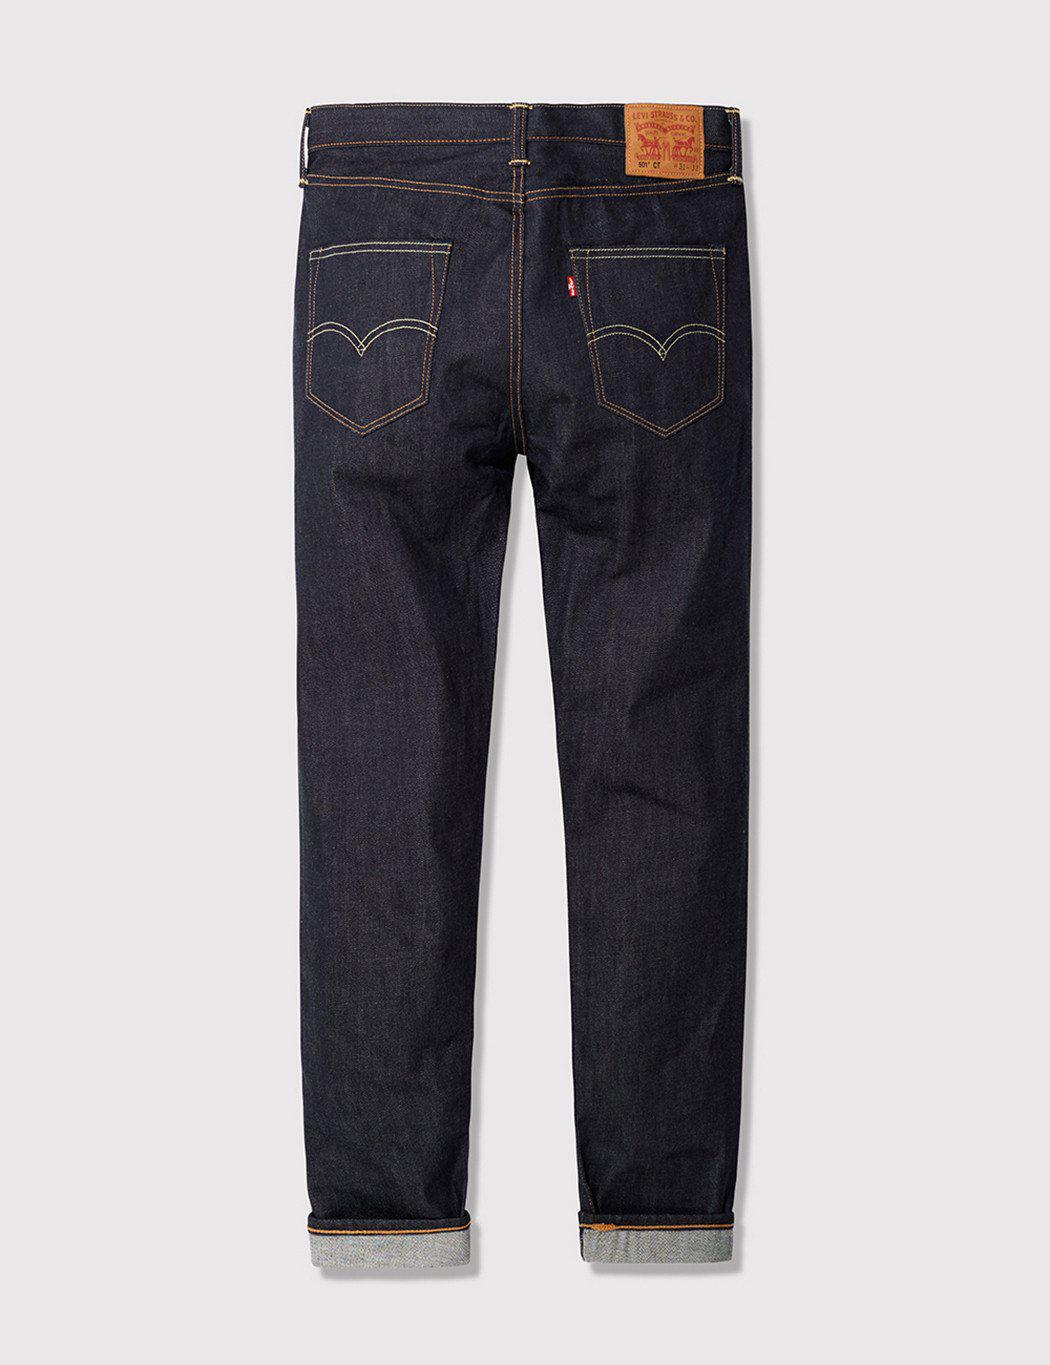 Levi's 501 Ct Customised Tapered Jeans in Blue for Men - Lyst